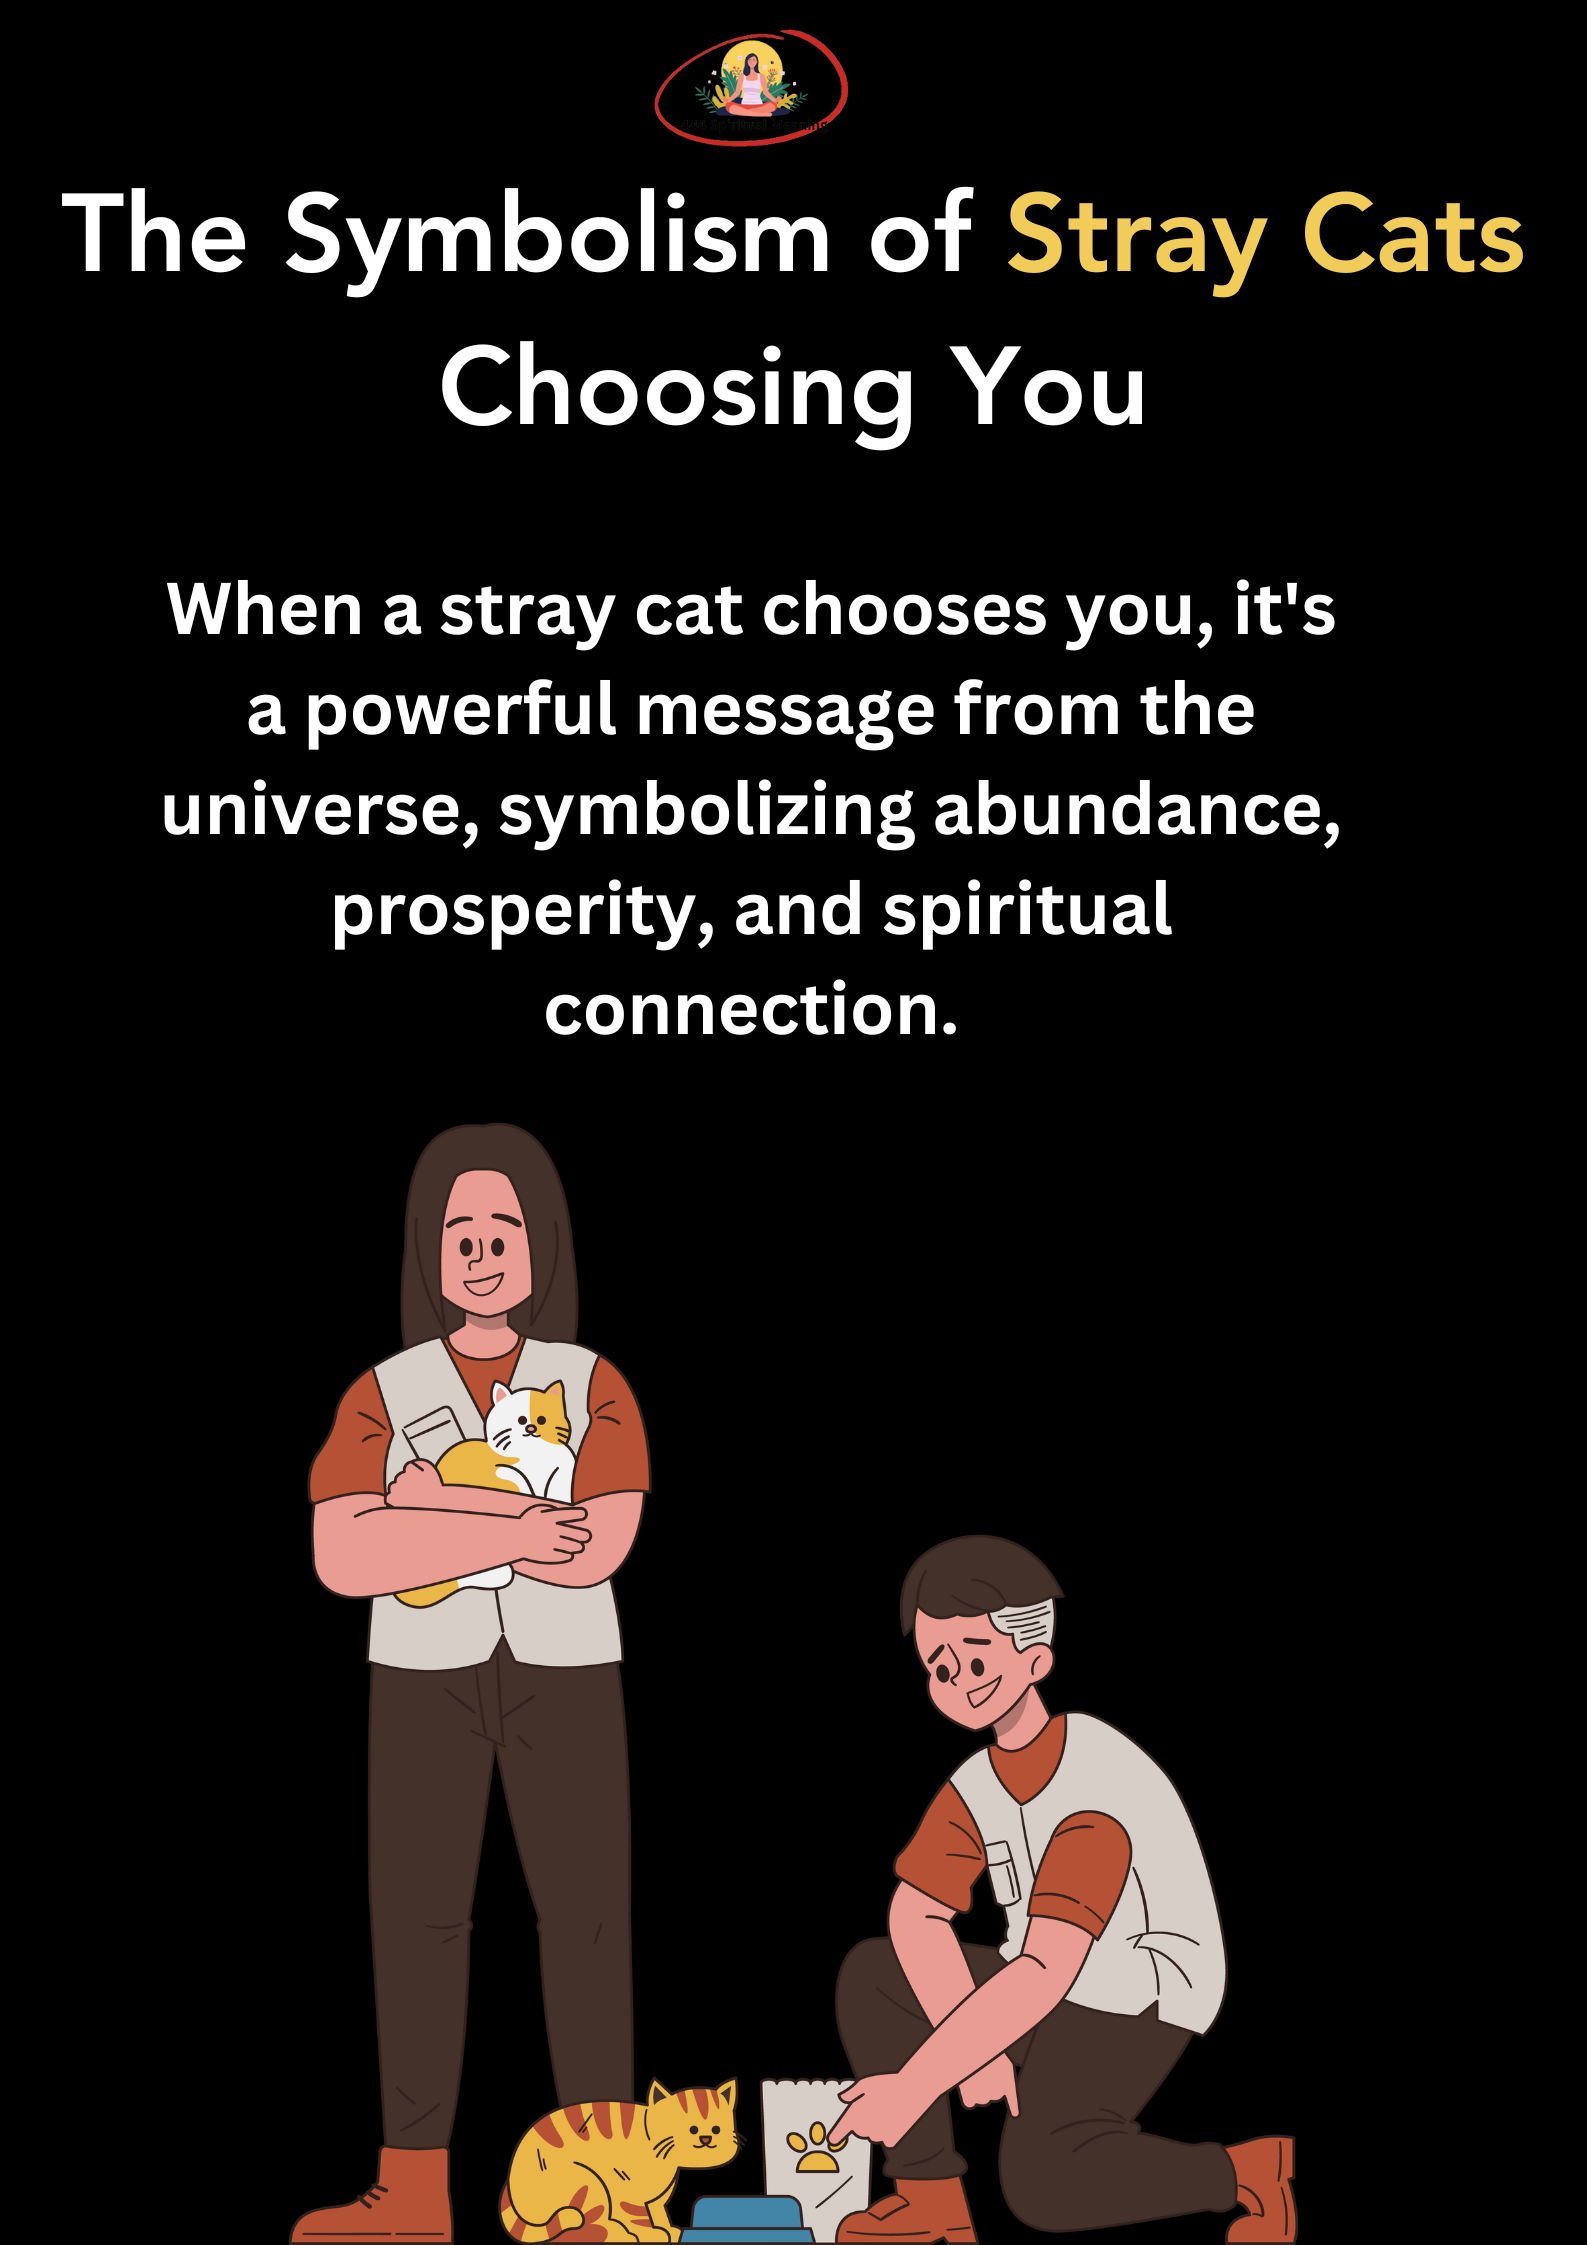 The Symbolism of Stray Cats Choosing You